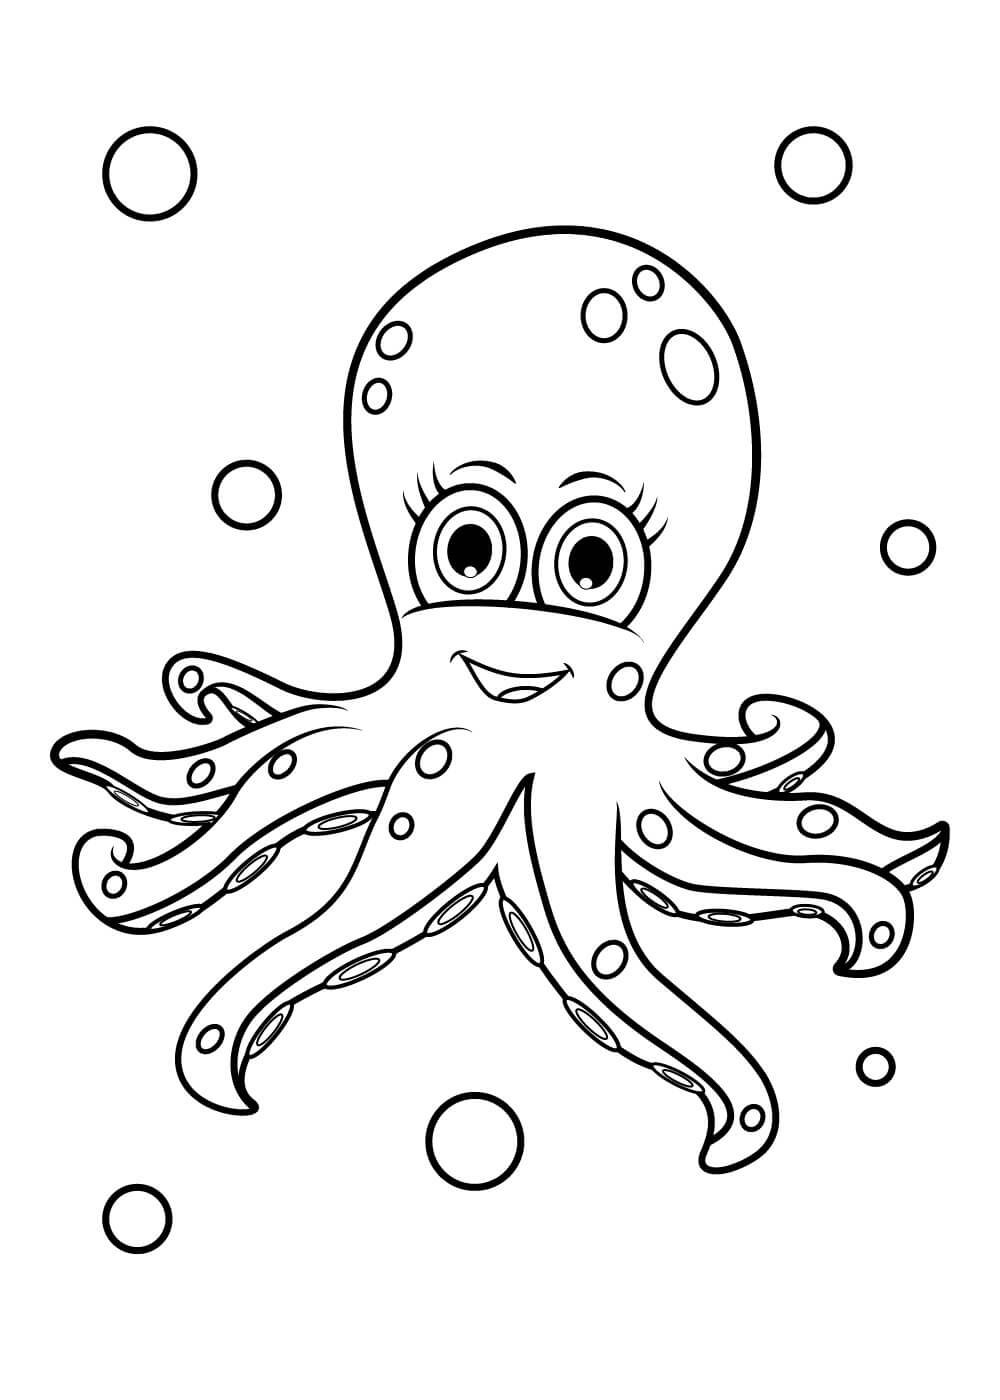 Fun Octopus coloring page - Download, Print or Color Online for Free